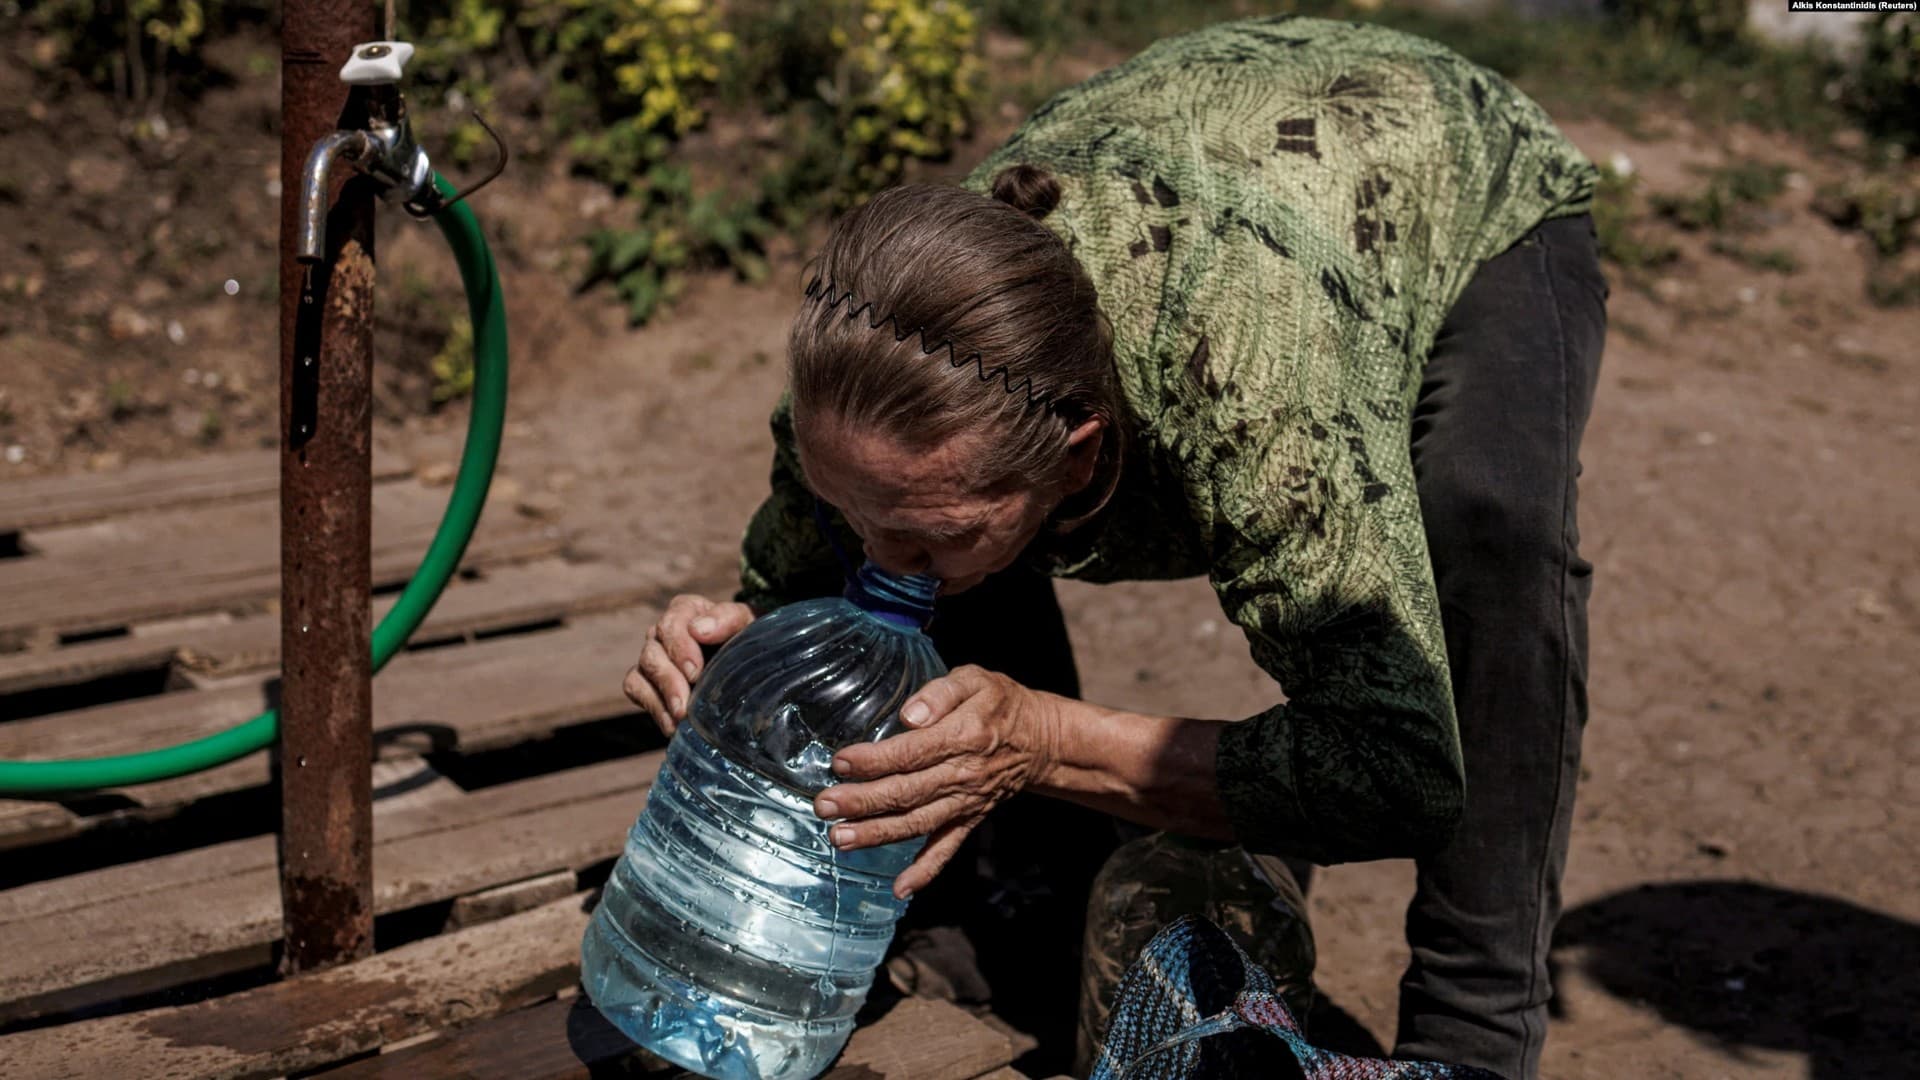 A woman drinks clean water from a canister she just filled up in the eastern city of Slovyansk